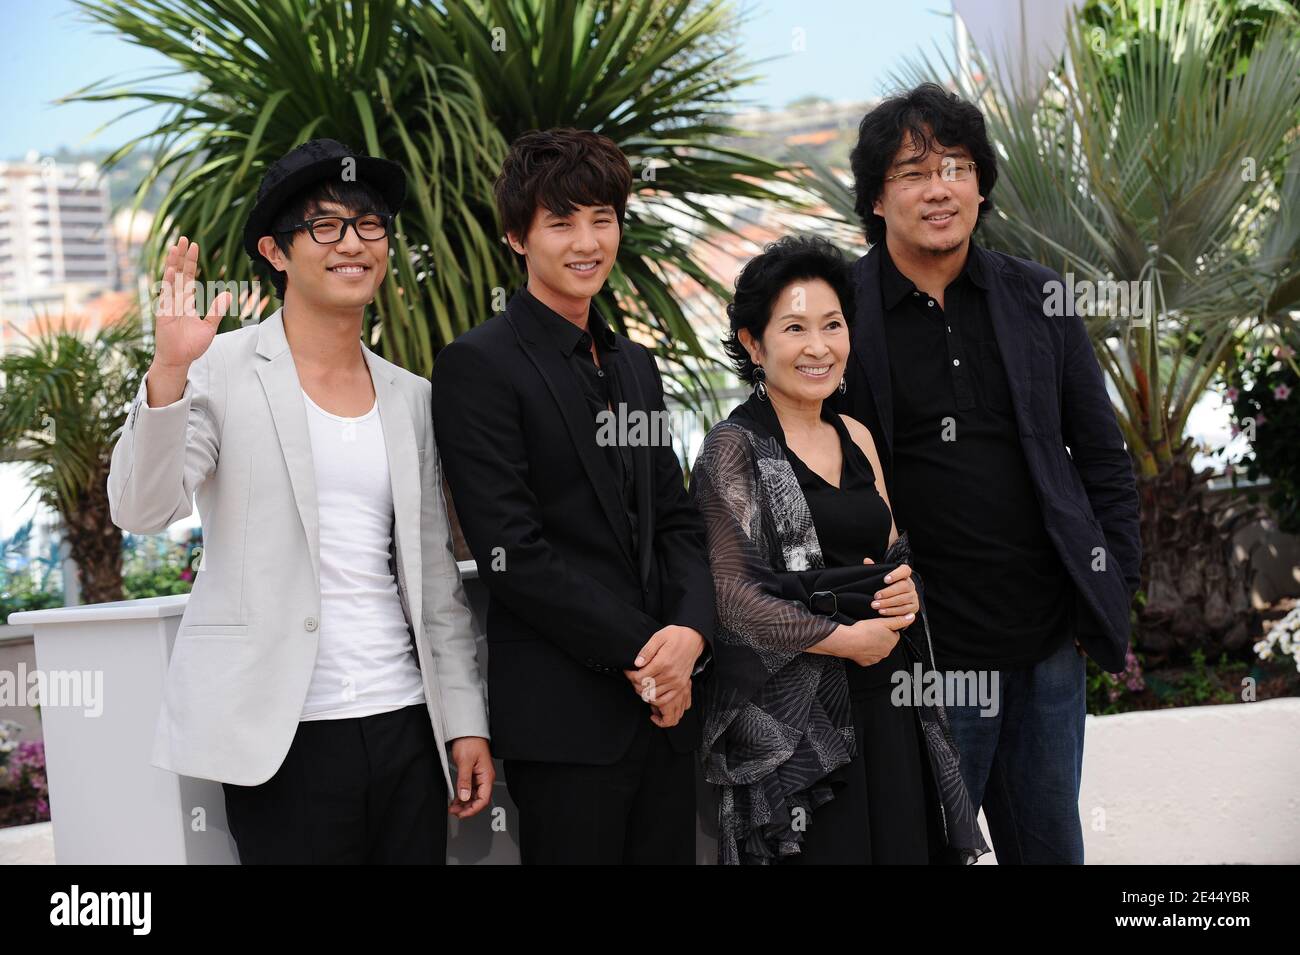 'Jin Goo, Won Bin, Kim Hye-Ja and director Bong Joon pose during the photo call of ''Mother'' at the 62nd Cannes Film Festival. Cannes, France, May 16, 2009. Photo by Lionel Hahn/ABACAPRESS.COM' Stock Photo